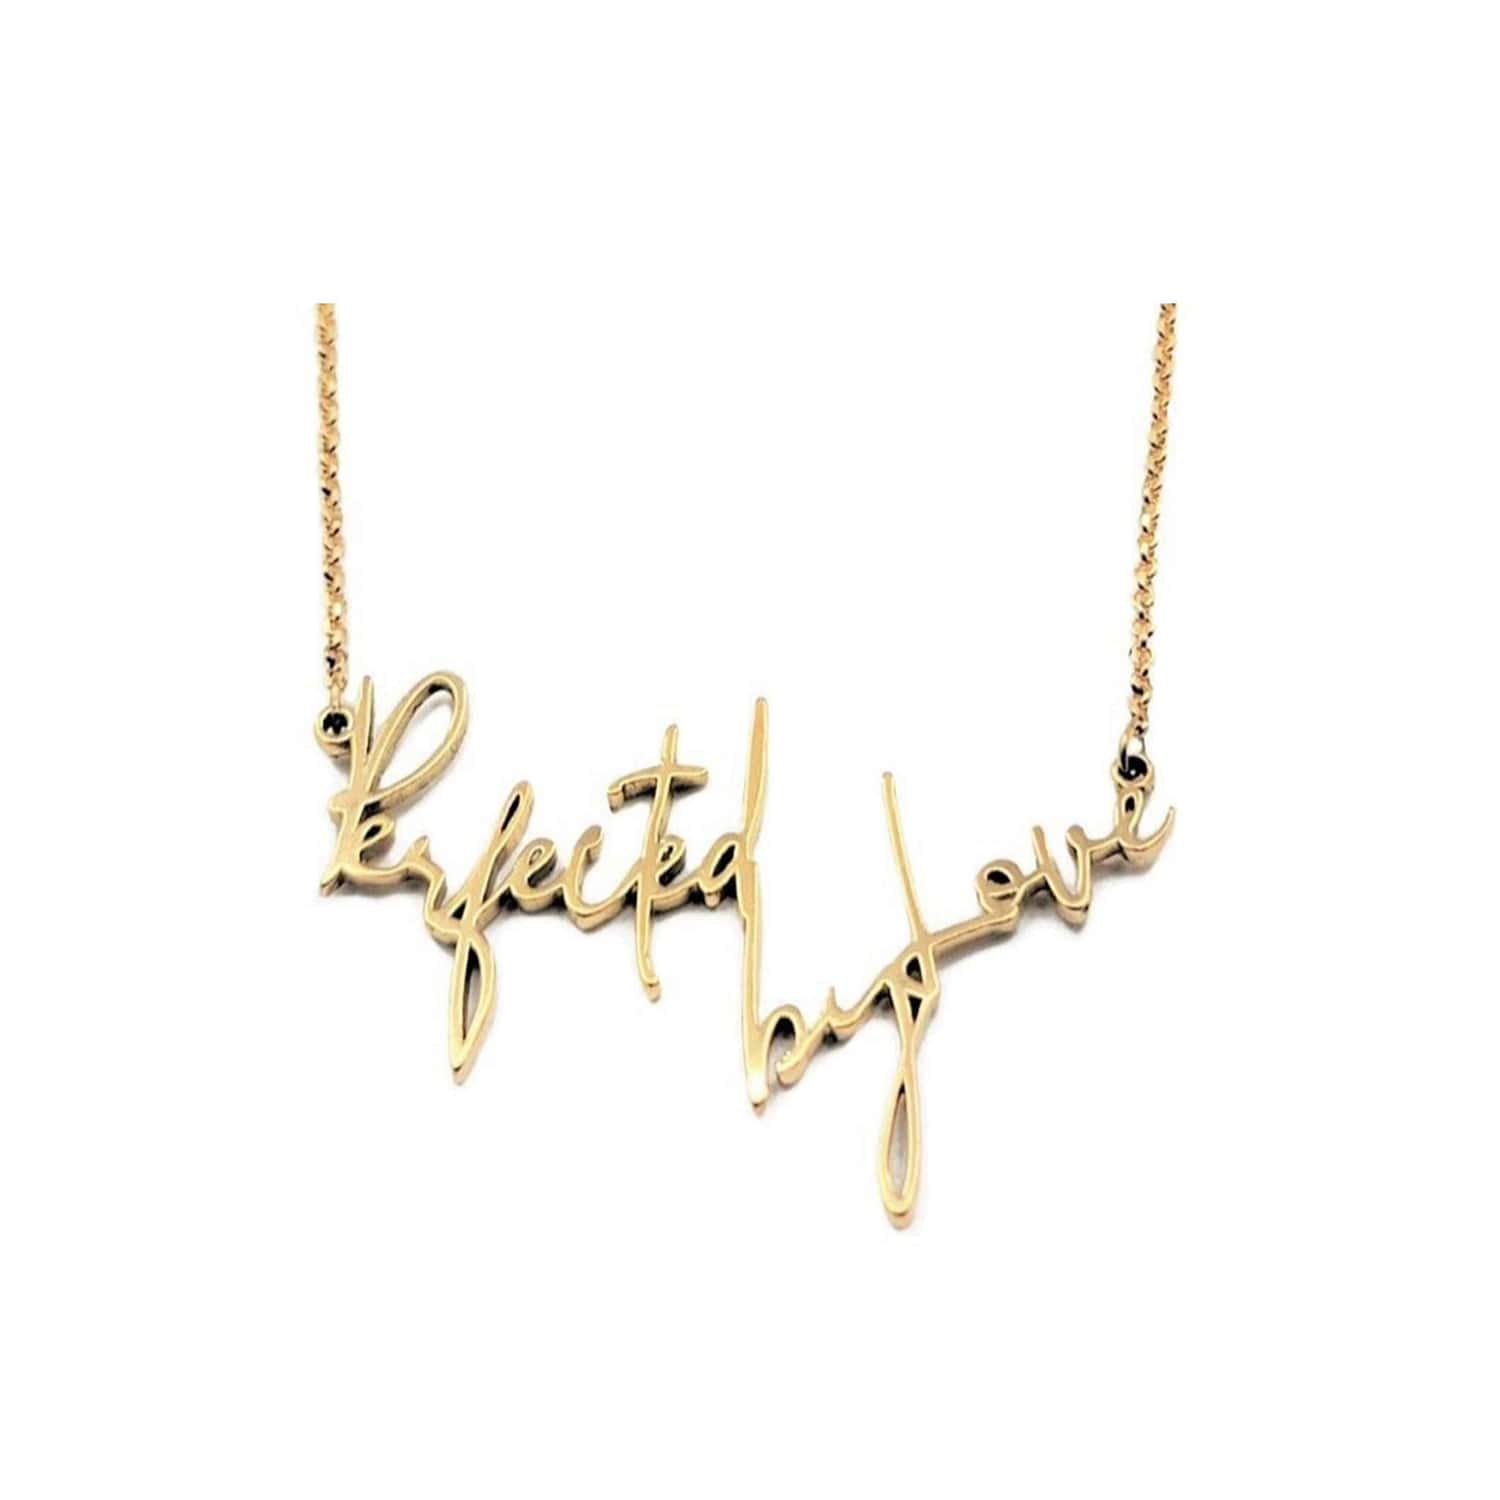 Rachel's Worth Perfected by Love Necklace in Gold